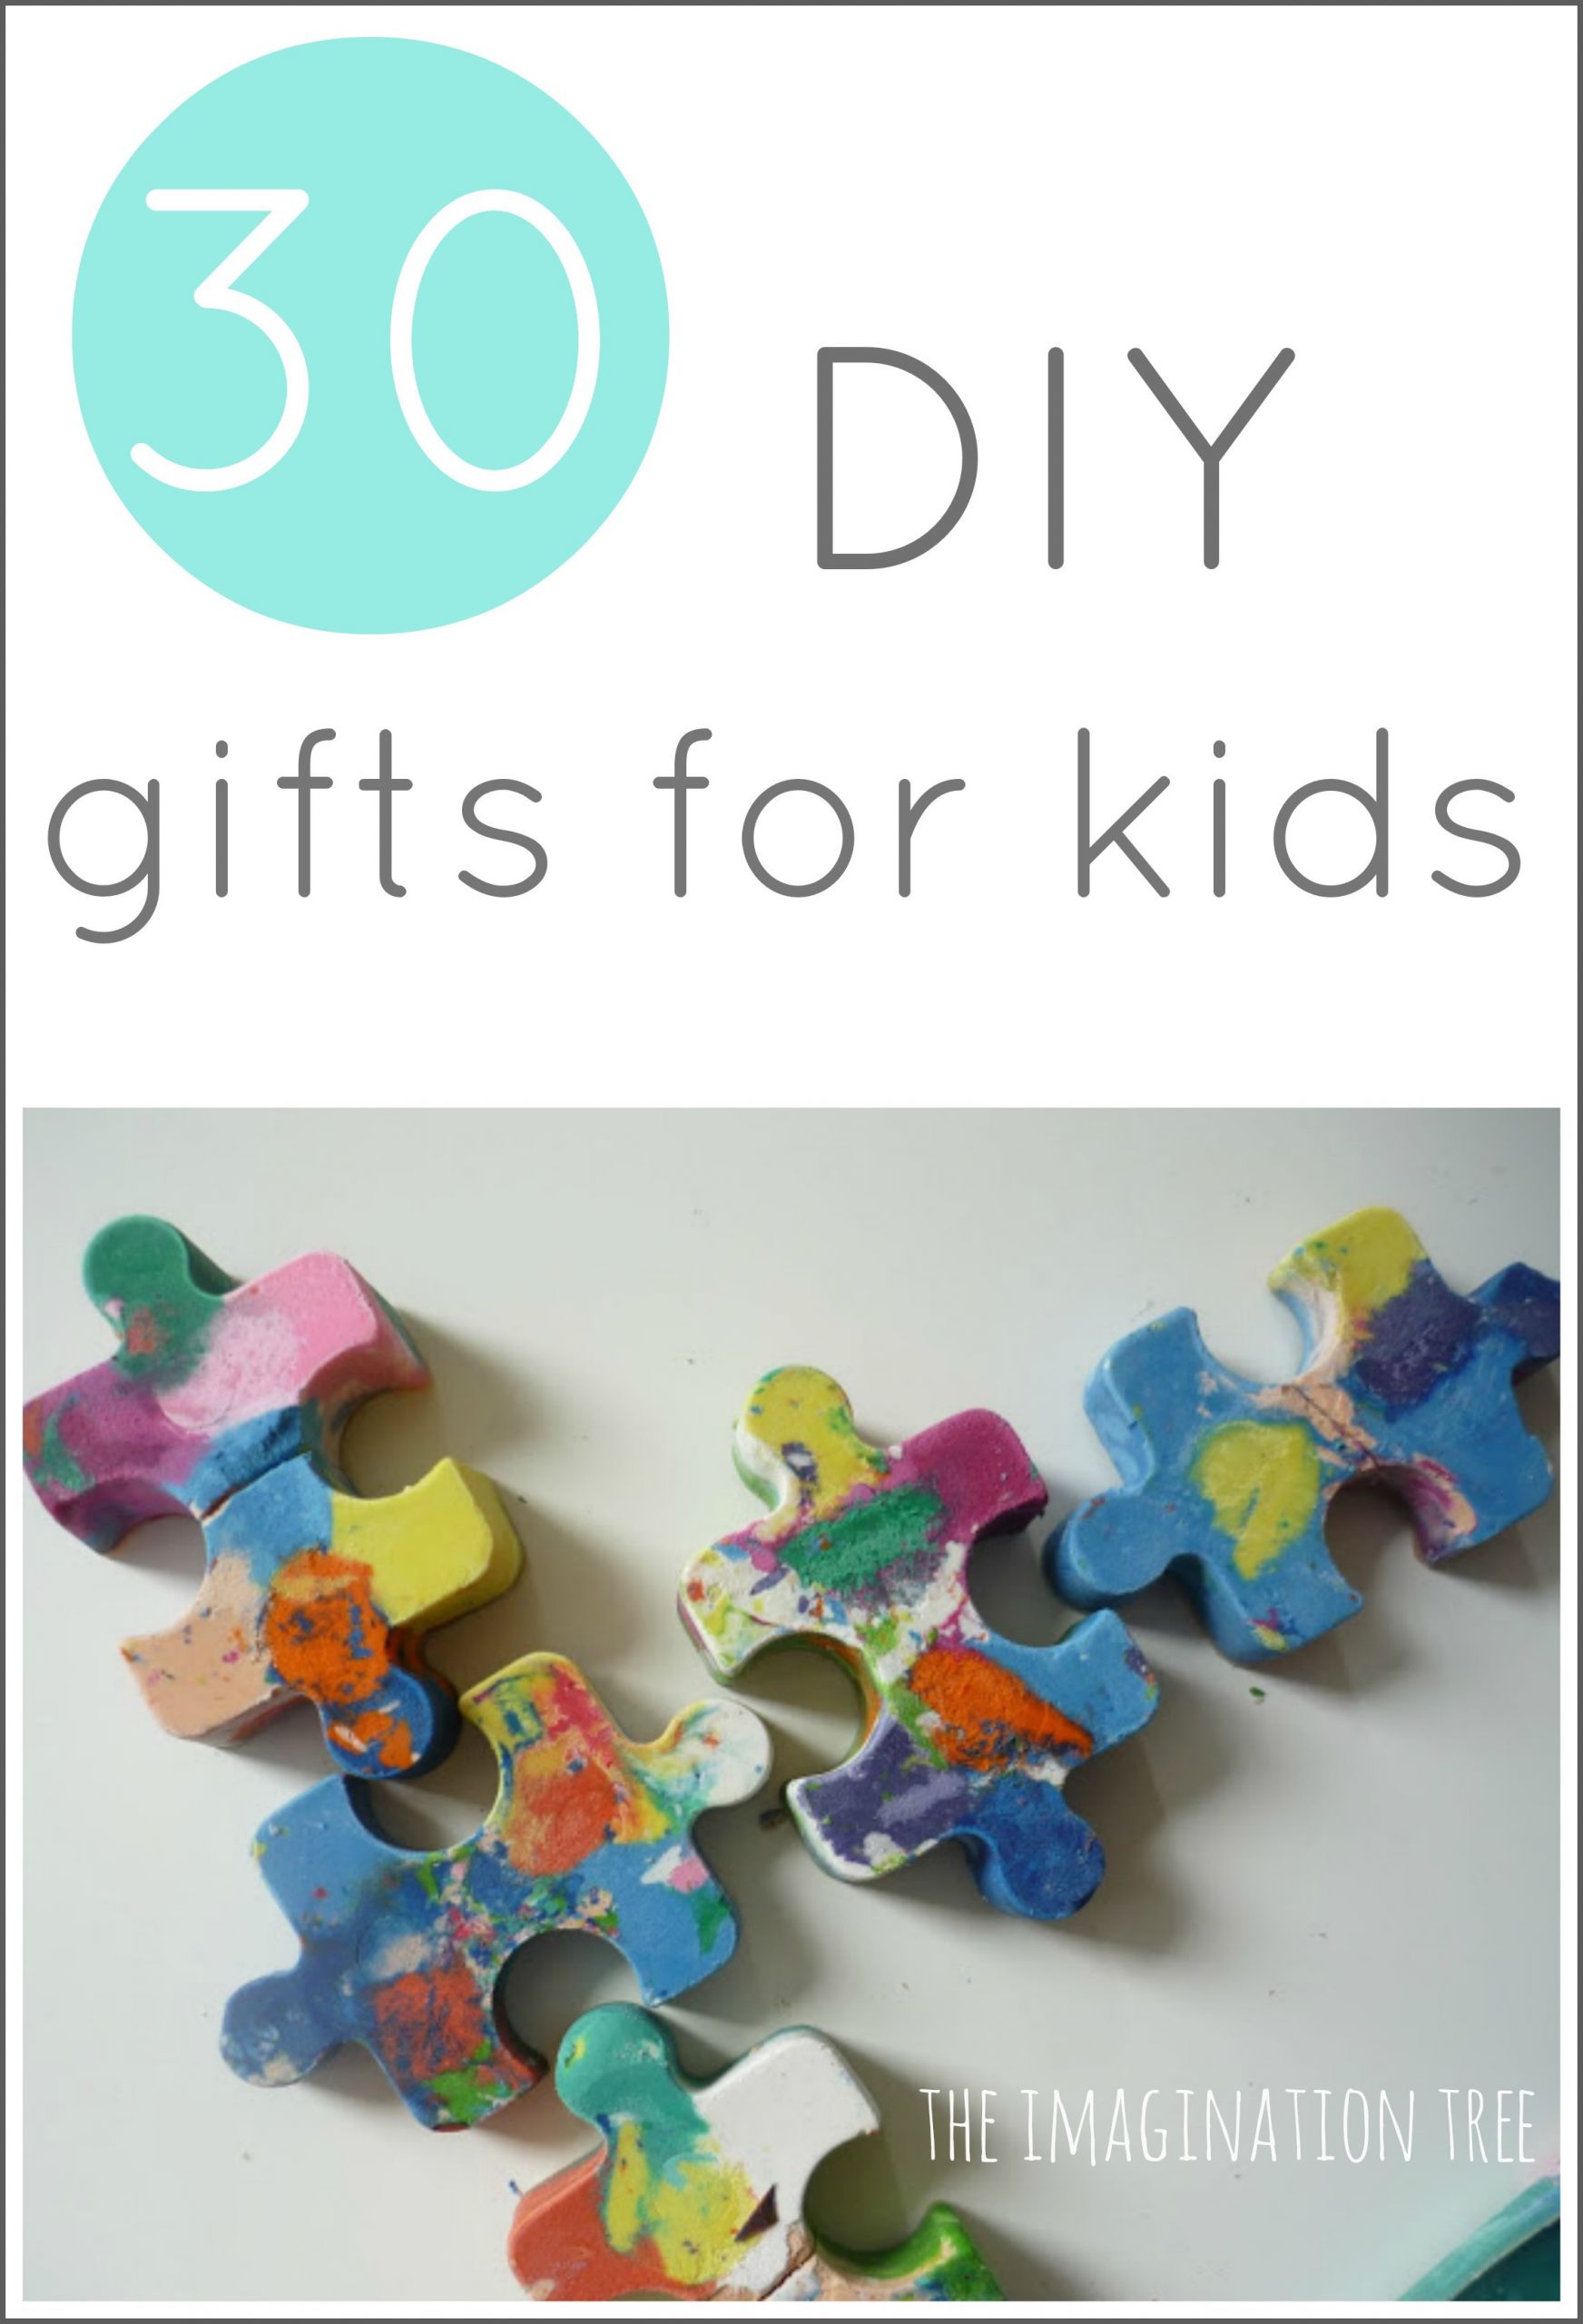 DIY Gifts For Kids
 30 DIY Gifts to Make for Kids The Imagination Tree